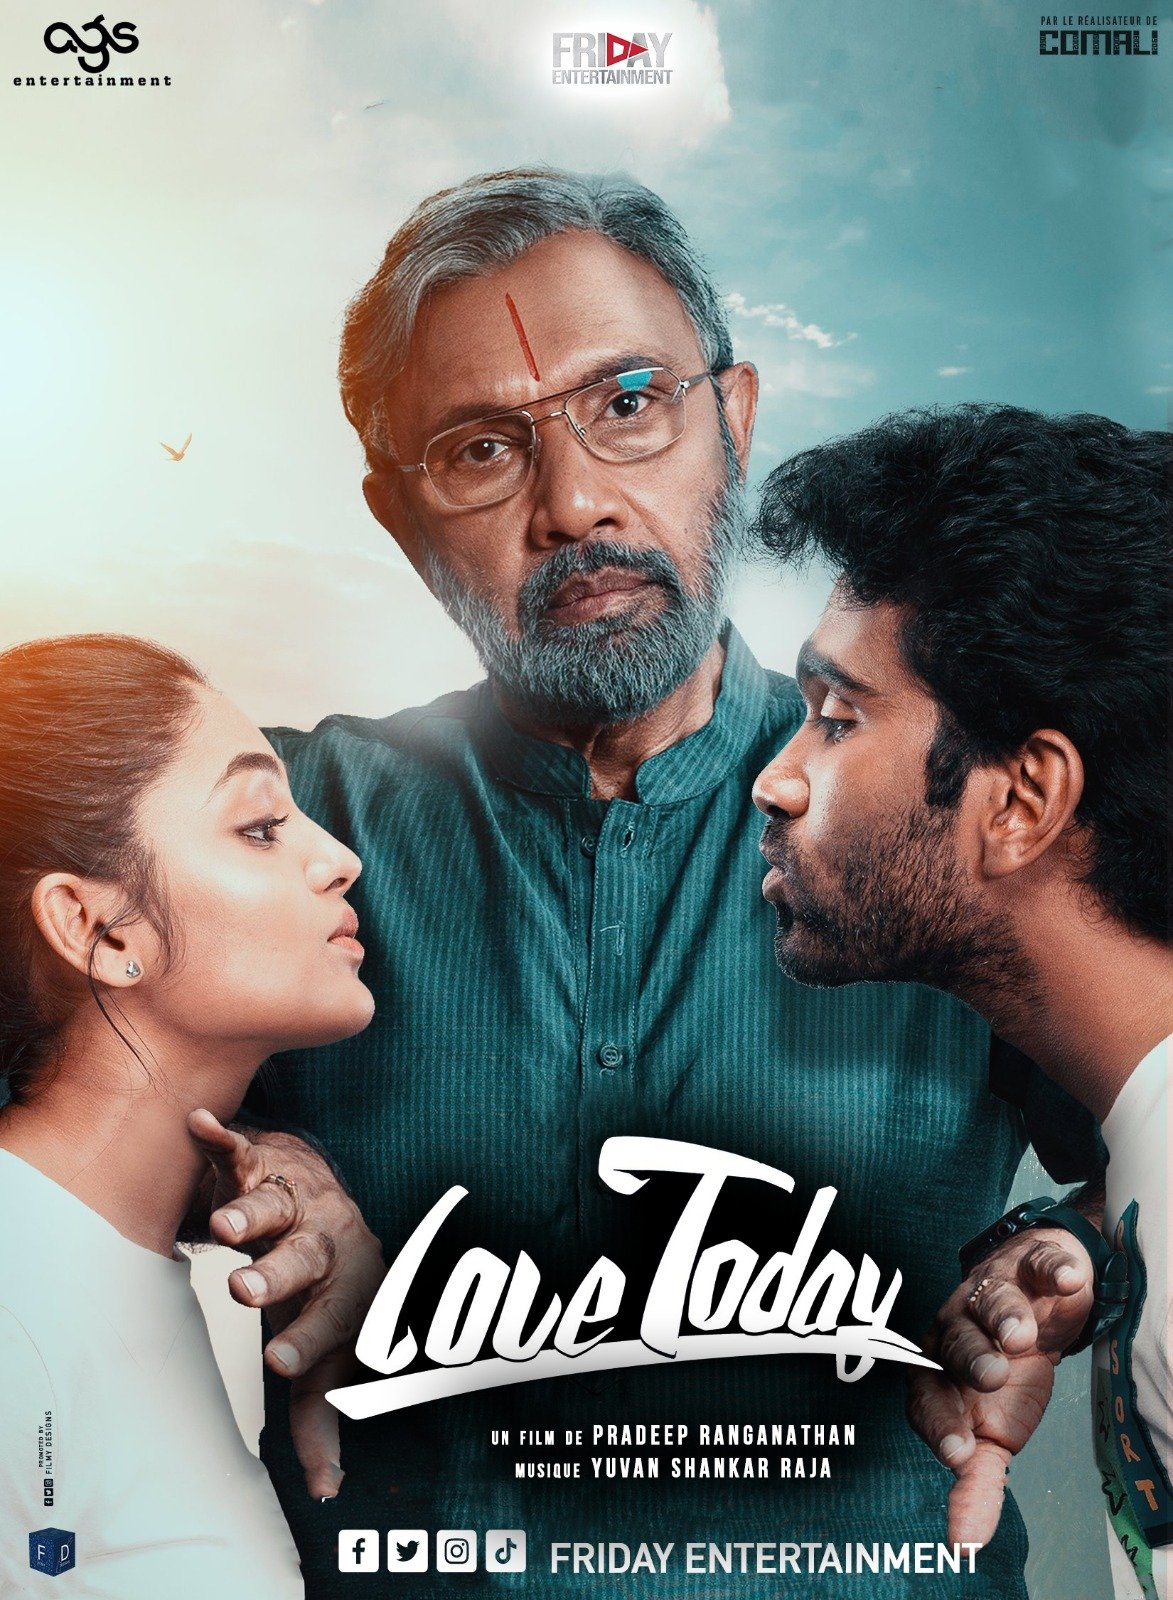 love today movie review wikipedia